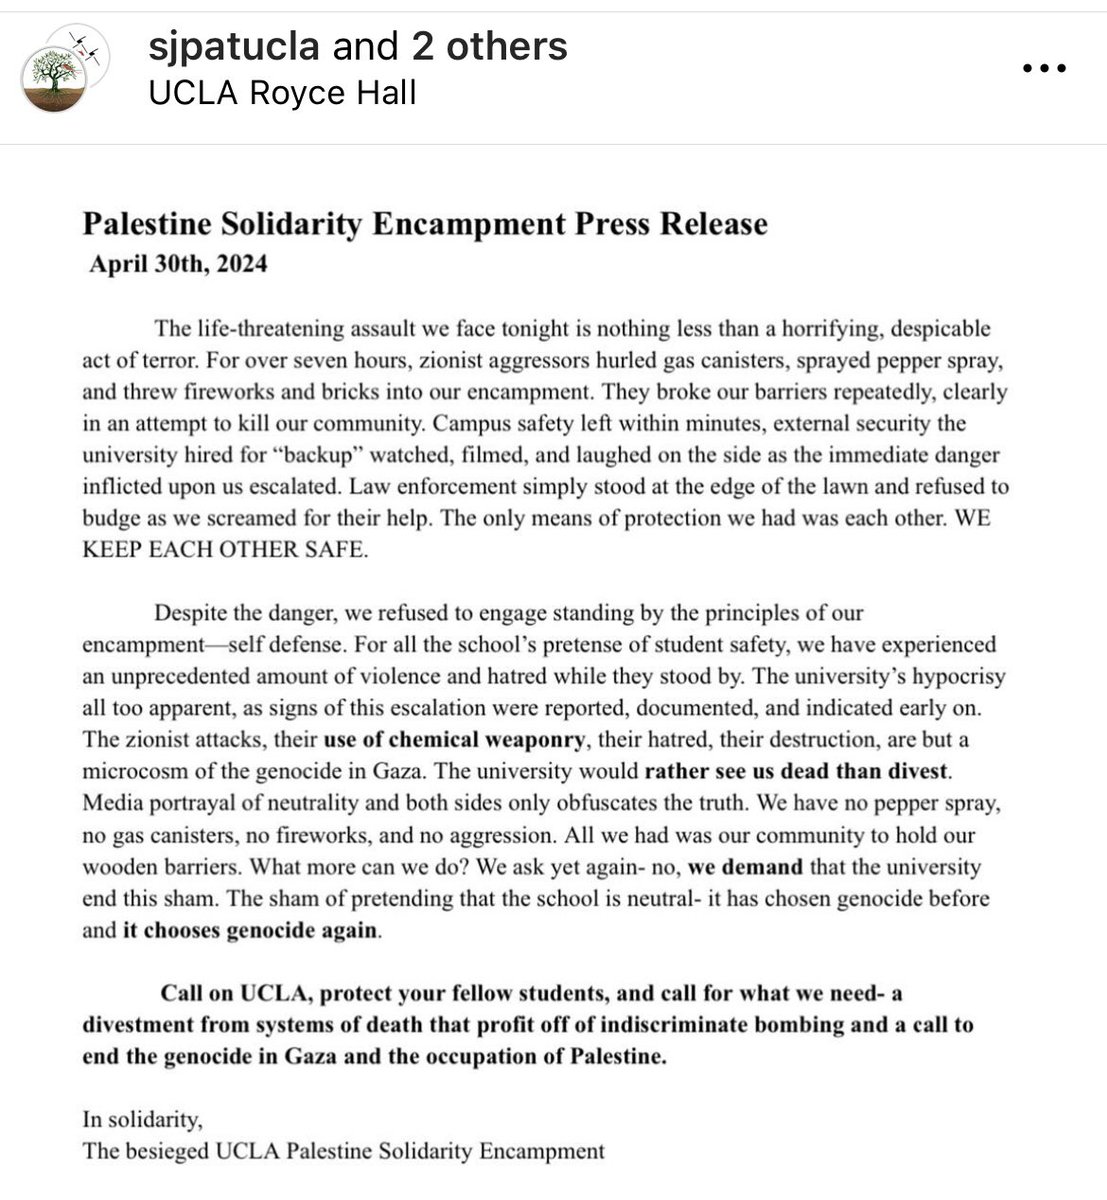 Disgusting+unsurprising how politicians & mainstream media are spinning the story of student activism vs police violence. & I reshare voices @SJPatUCLA in the wake of Zionist attacks at Ucla (early Wed) so we don’t forget voices of those who actually endured the violence, unarmed